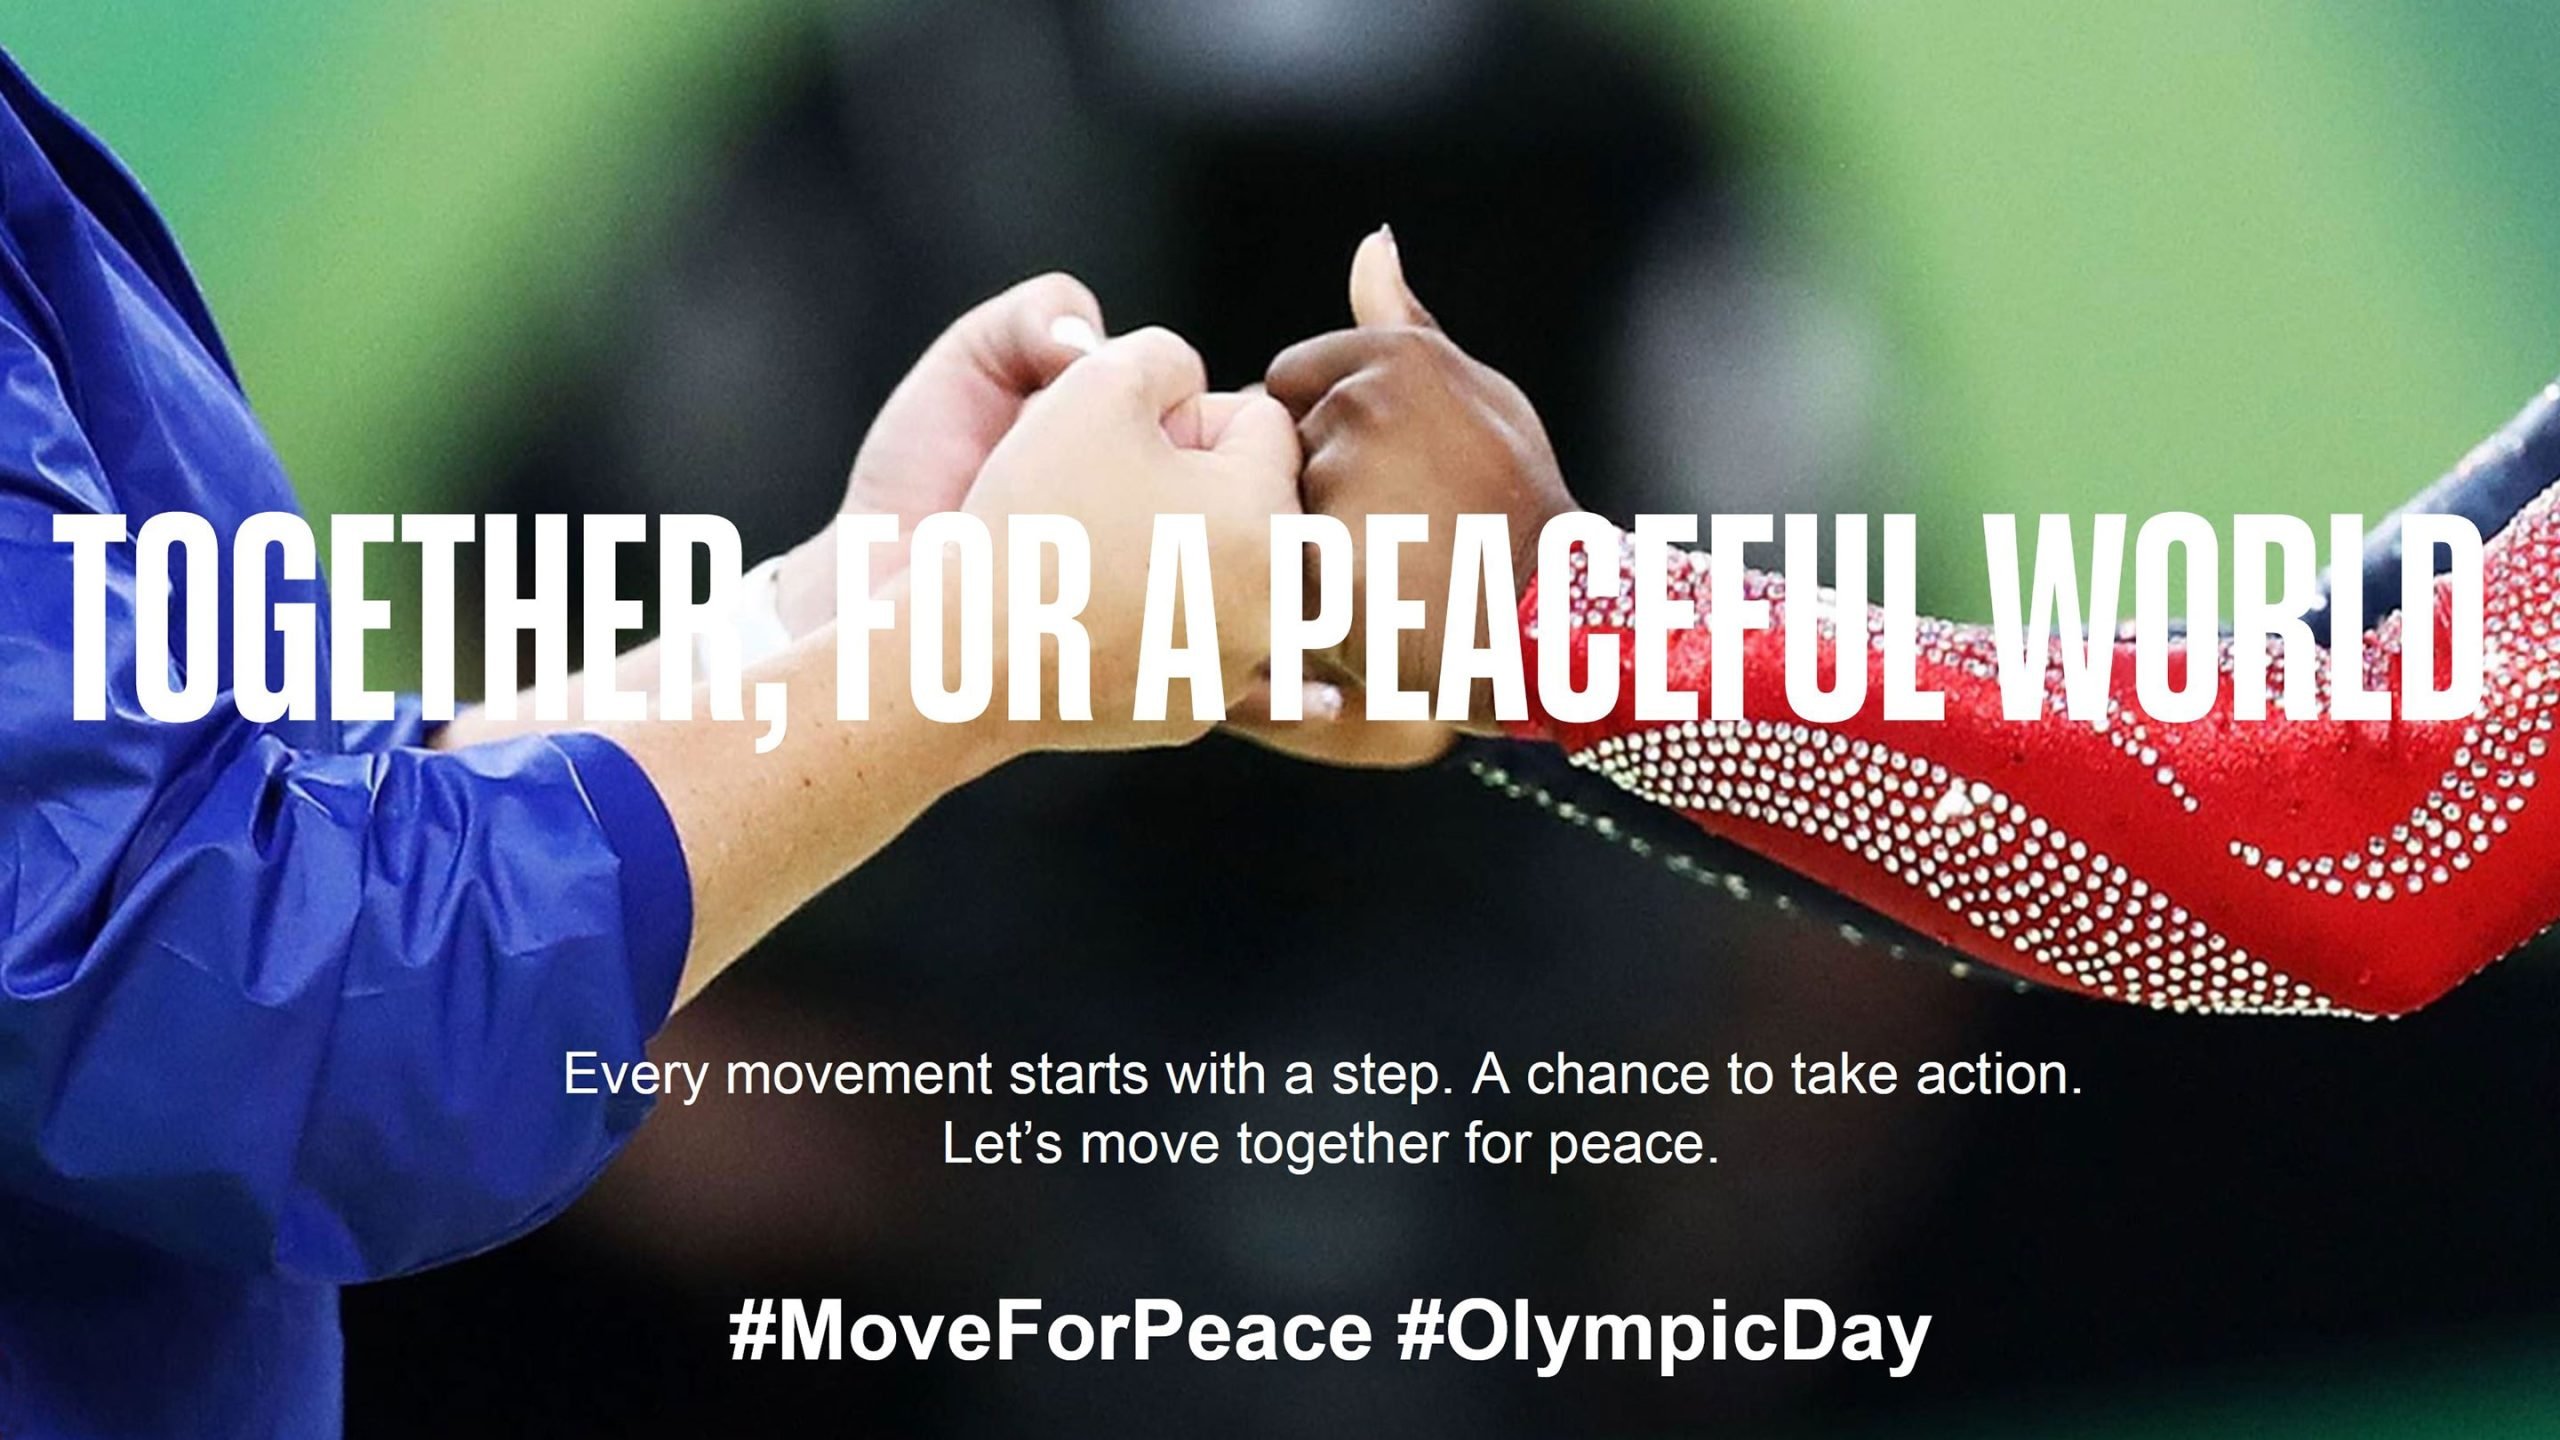 WORLD OLYMPIC DAY: TOGETHER, FOR A PEACEFUL WORLD